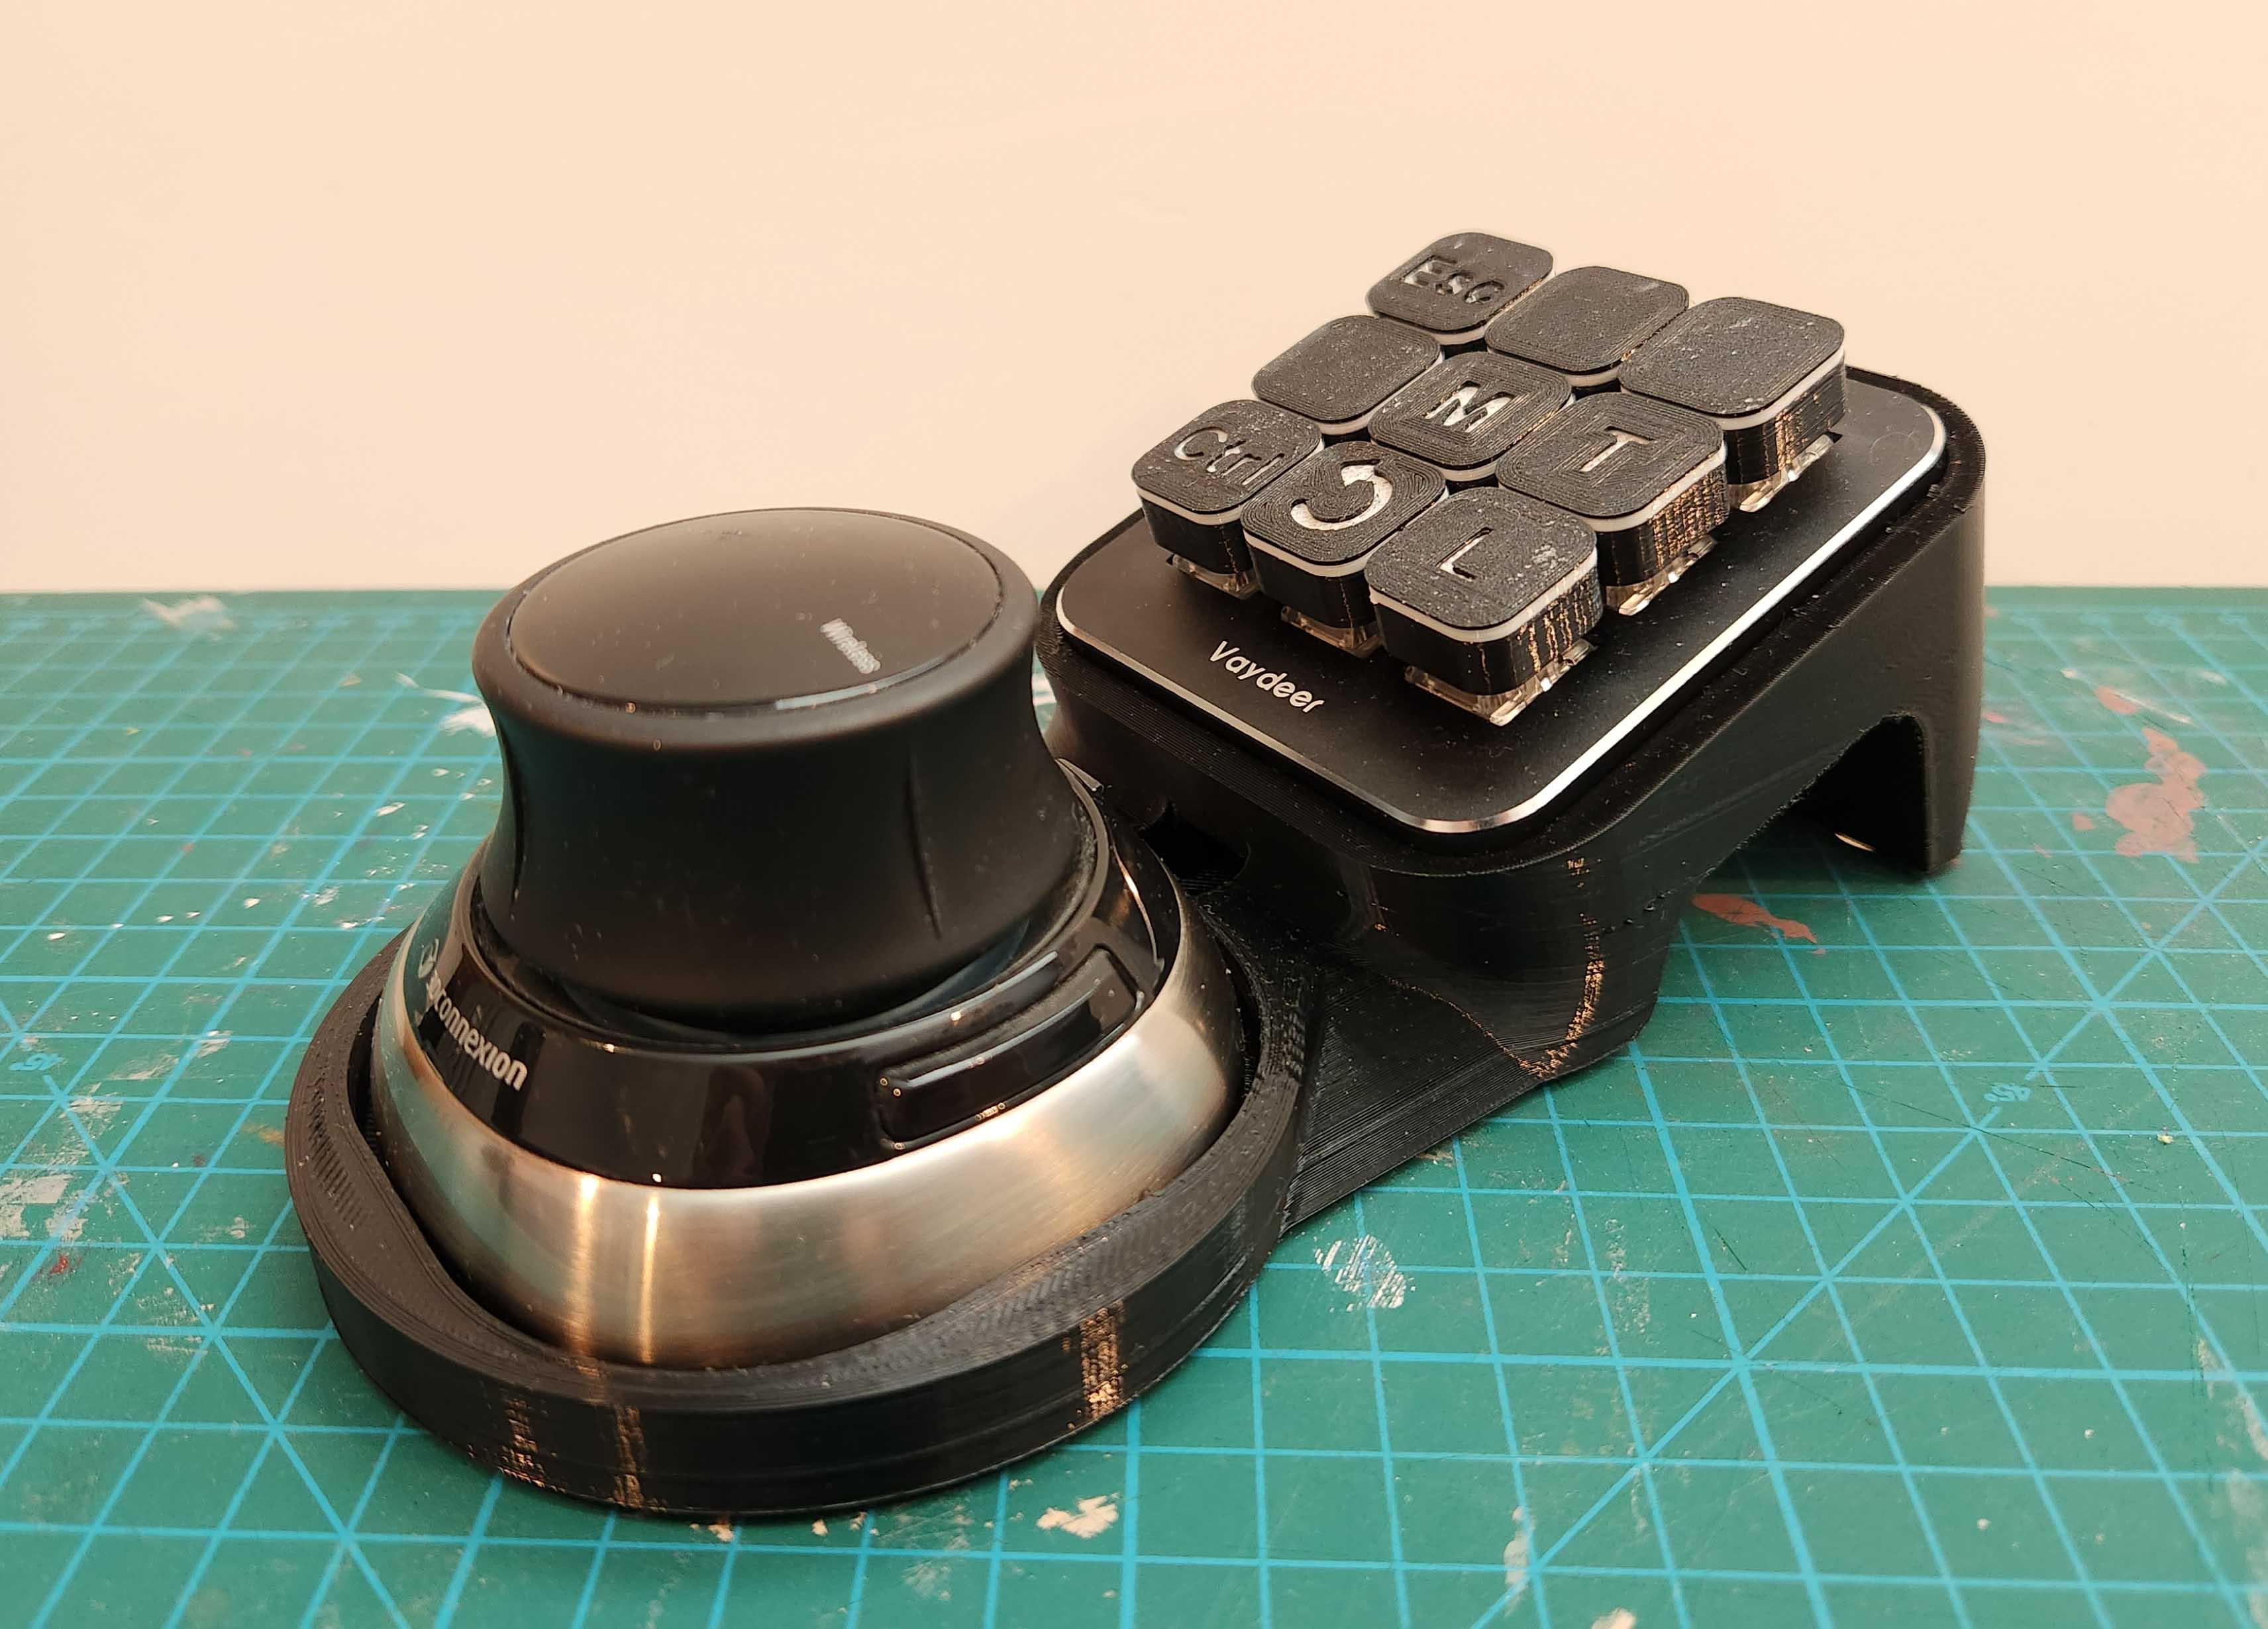 SpaceMouse wireless keypad upgrade 3d model